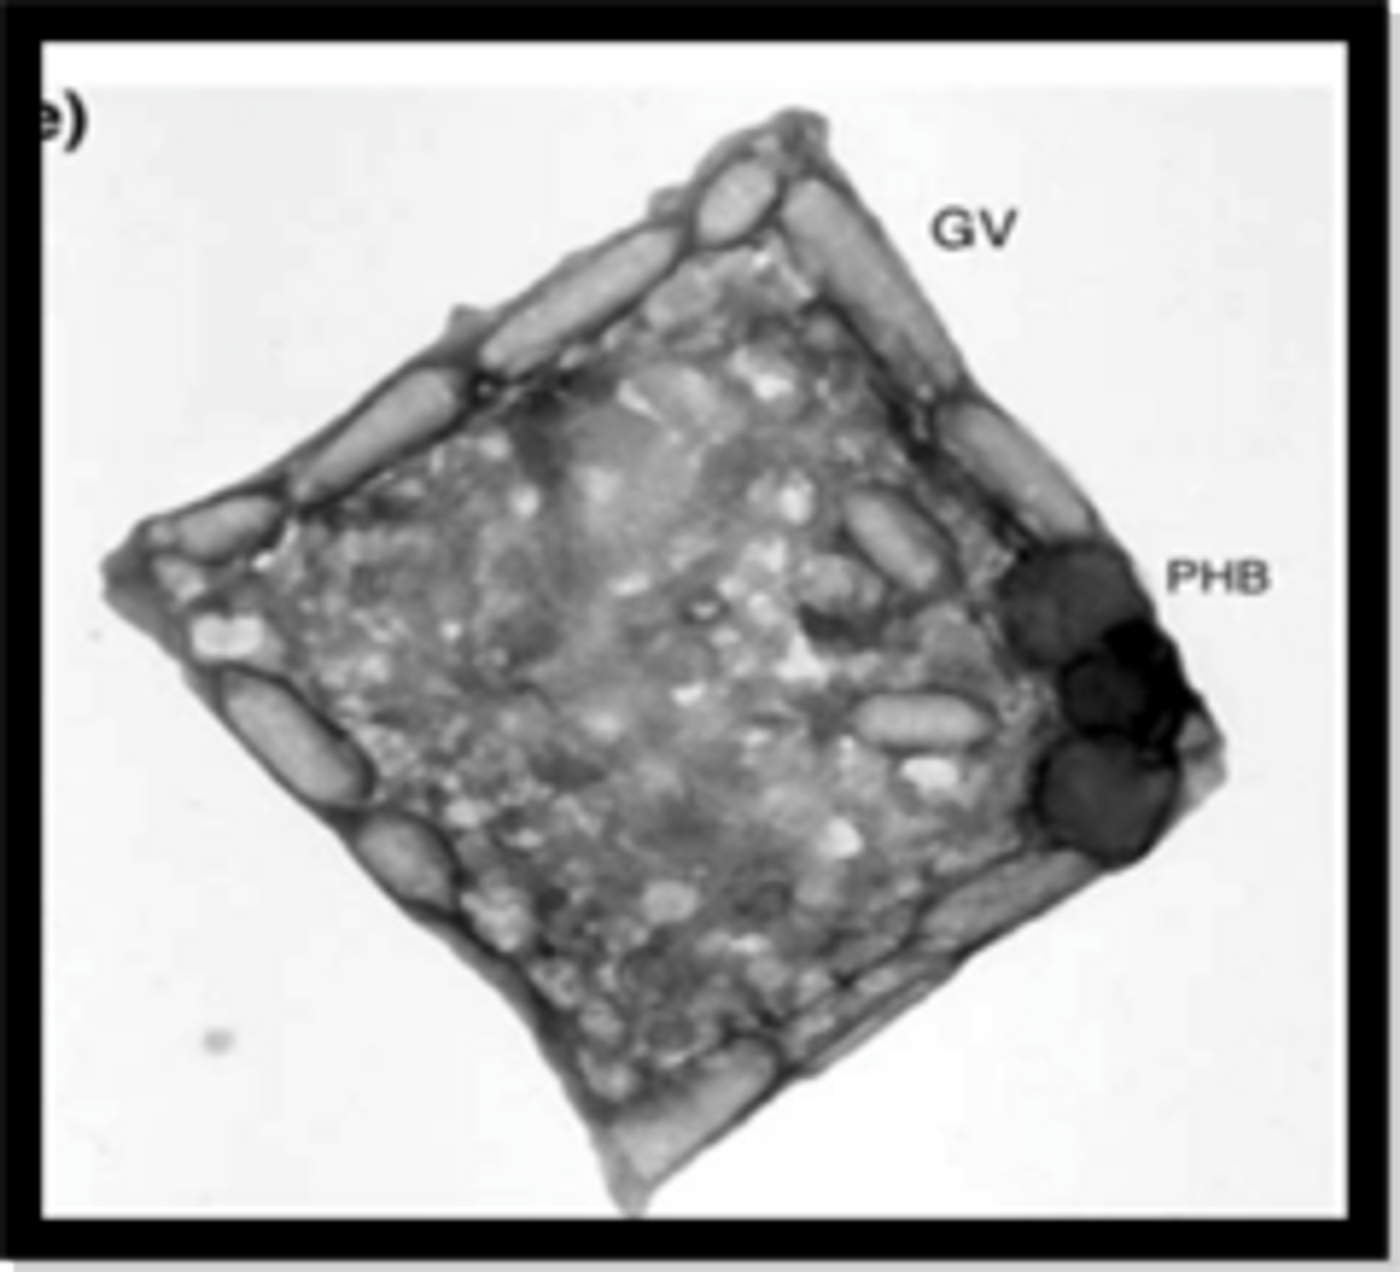 Gas vesicles (GV) line the cell periphery.